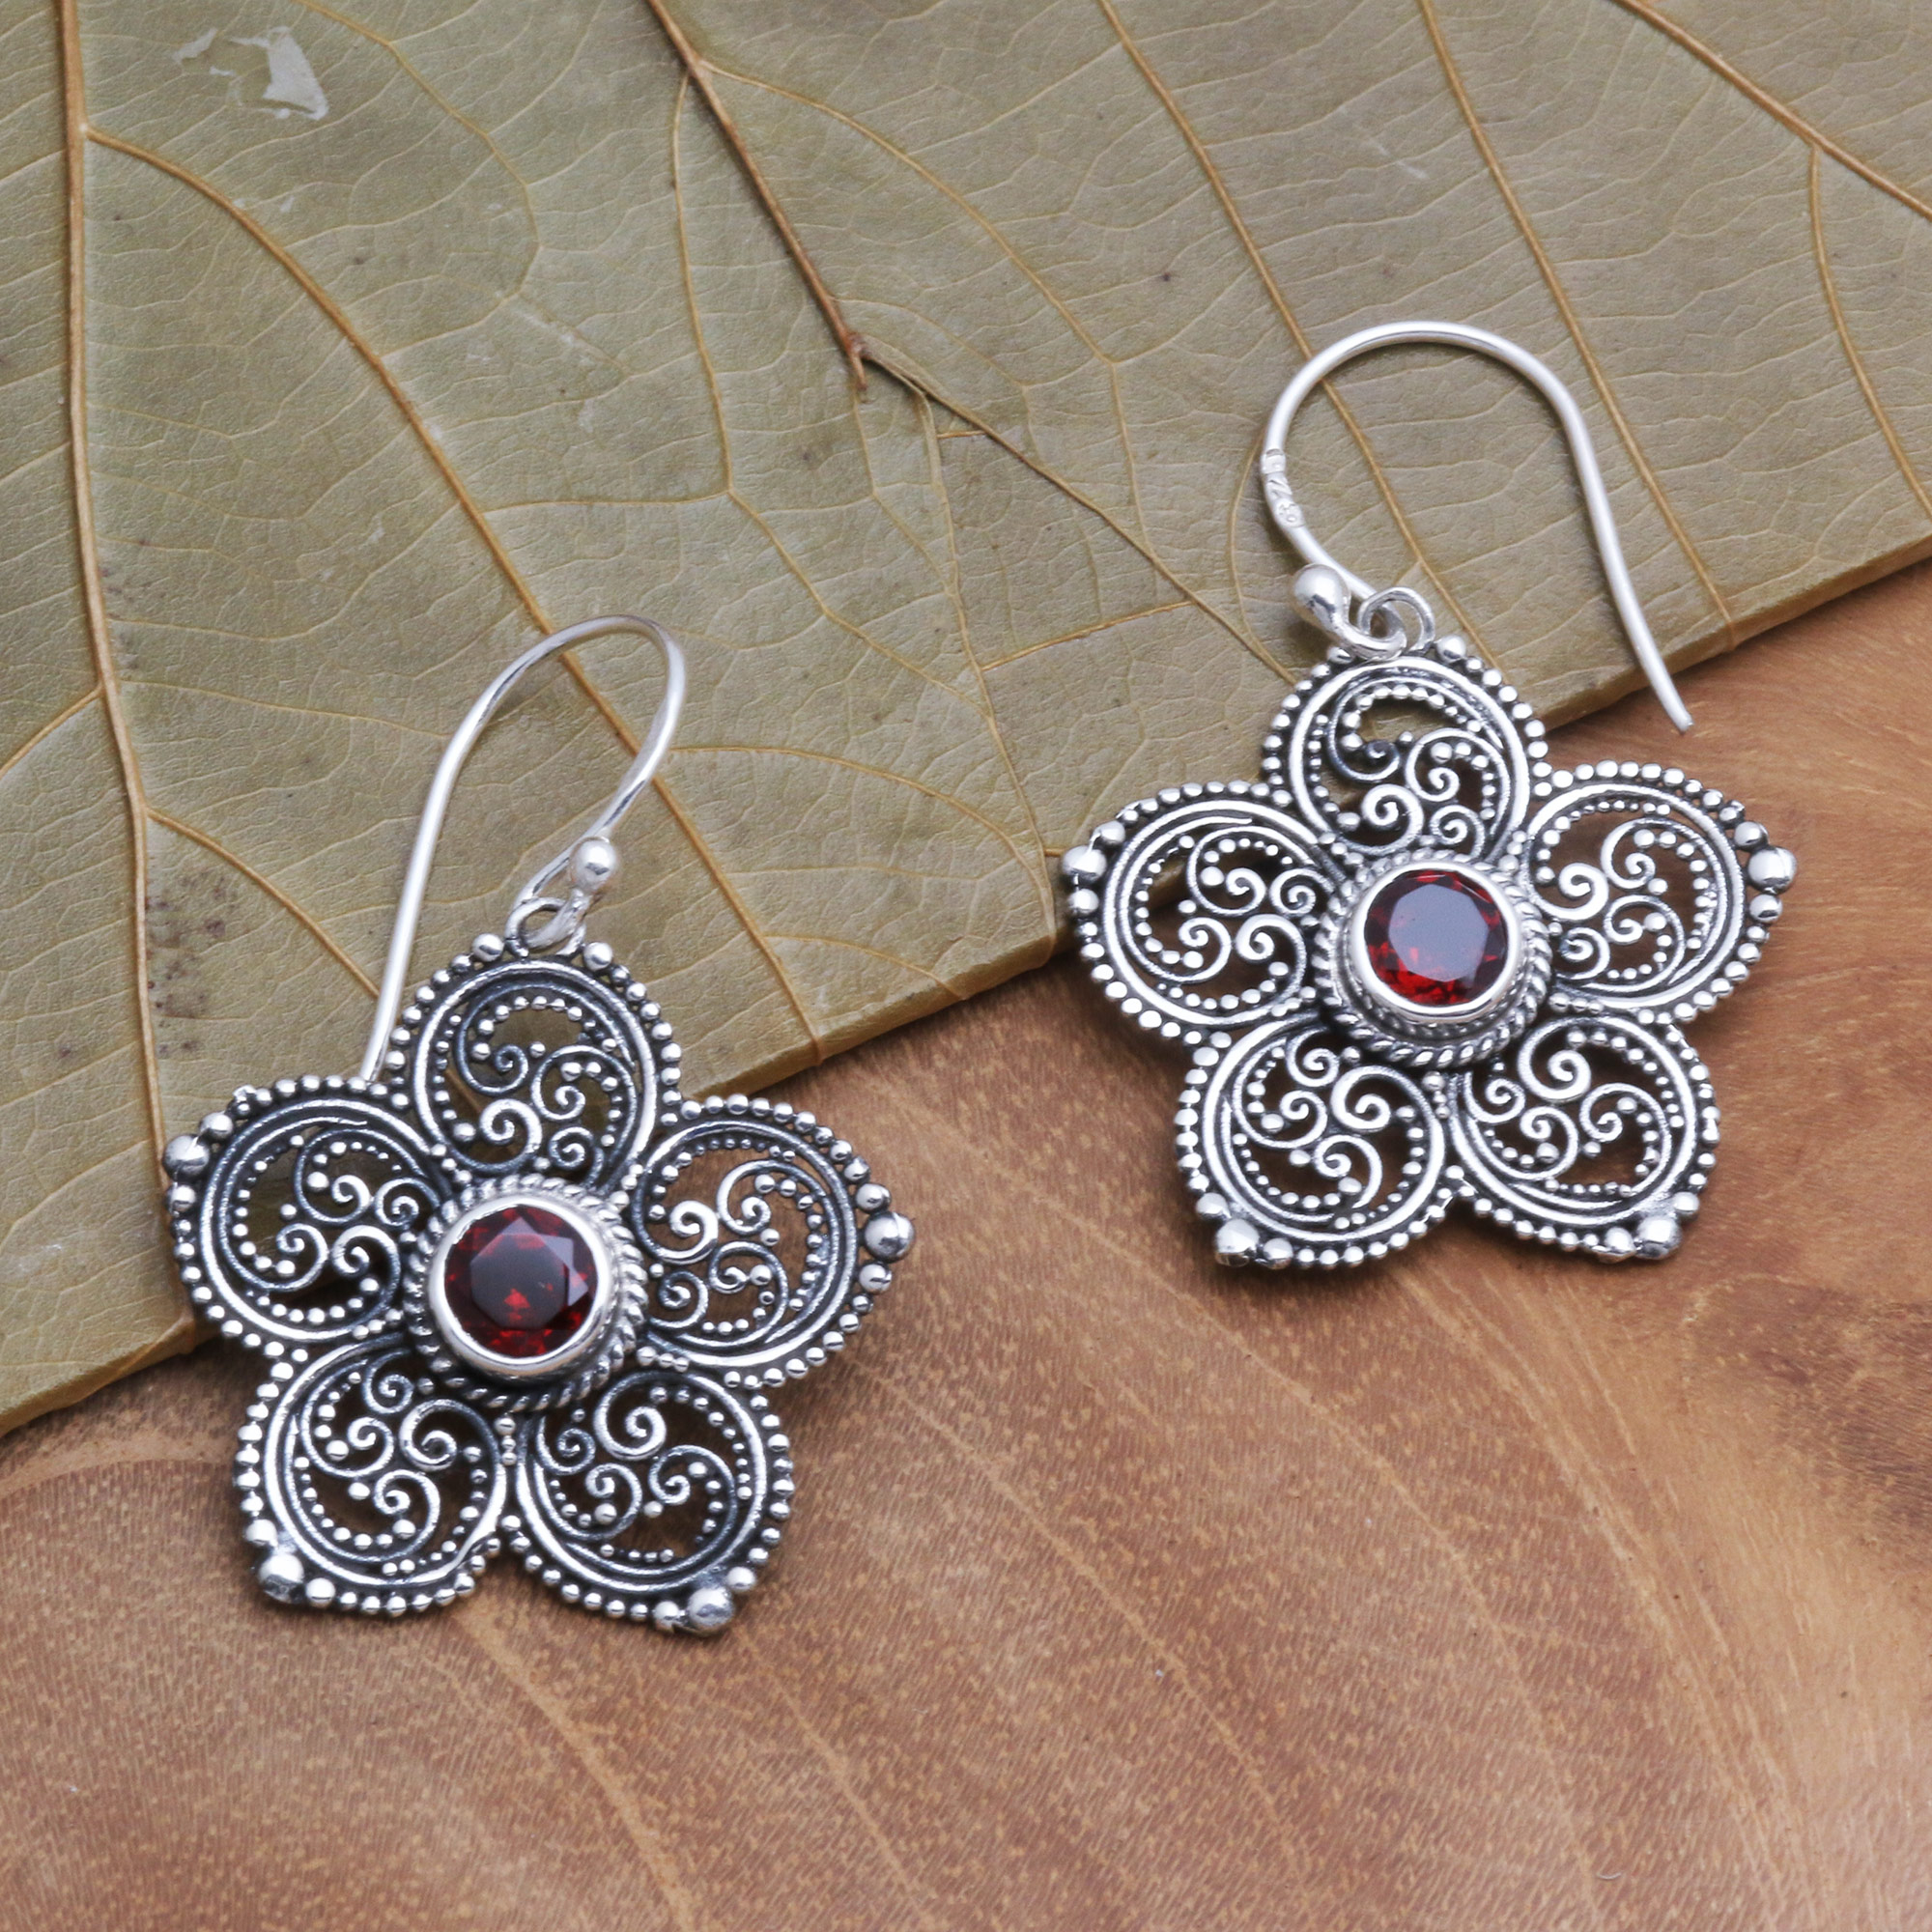 Superb Dangly Sterling Silver and Garnet Heart Ear Rings January Birthstone